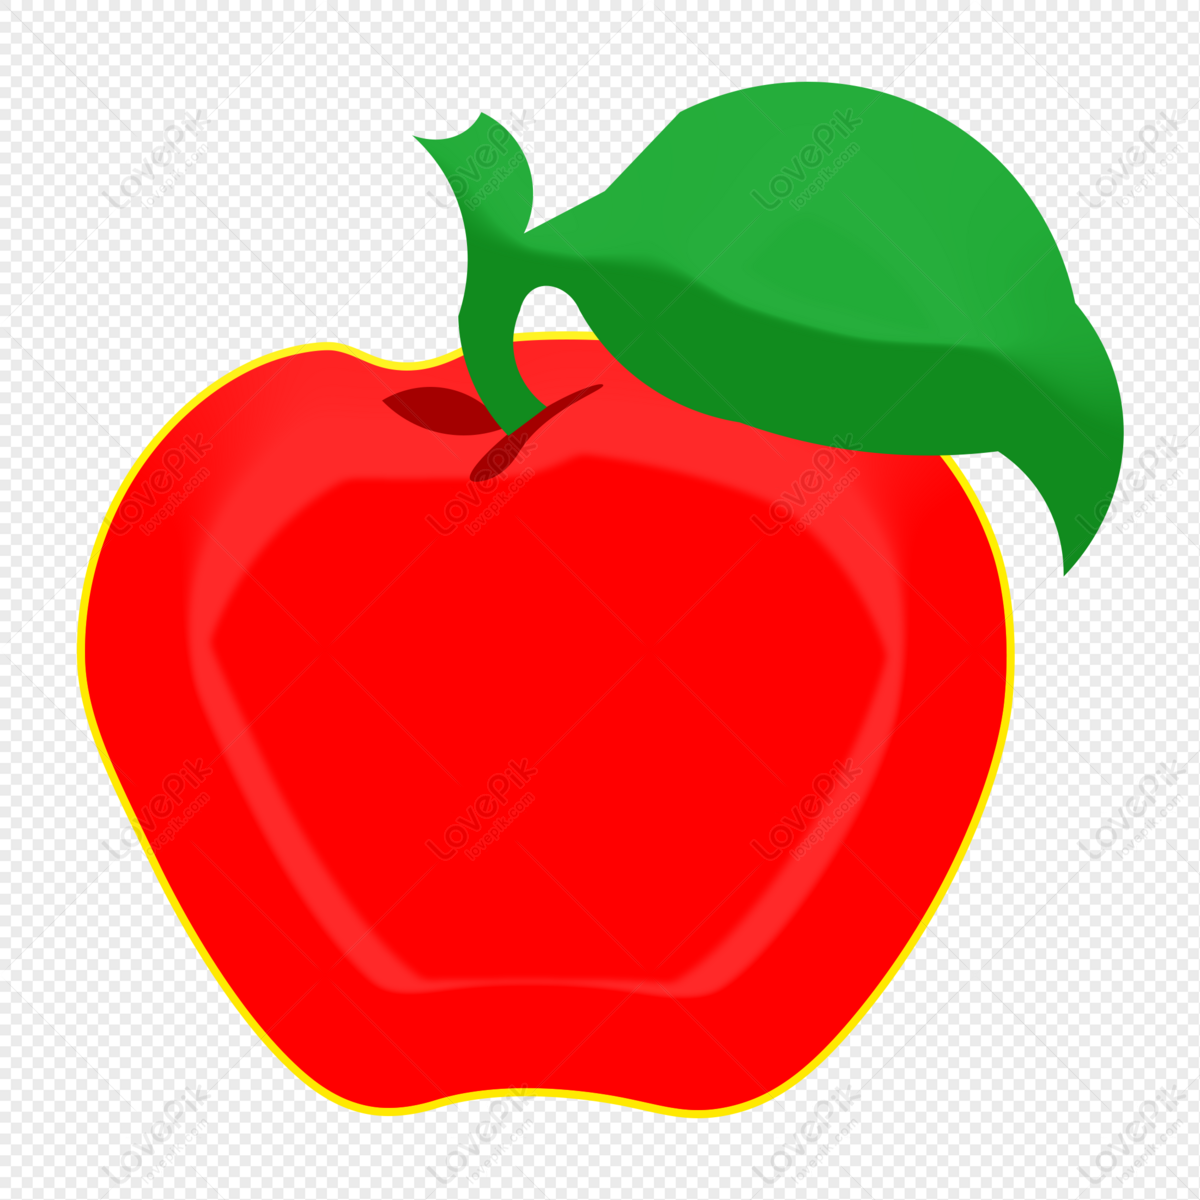 Cartoon Red Apple PNG White Transparent And Clipart Image For Free Download  - Lovepik | 401232112